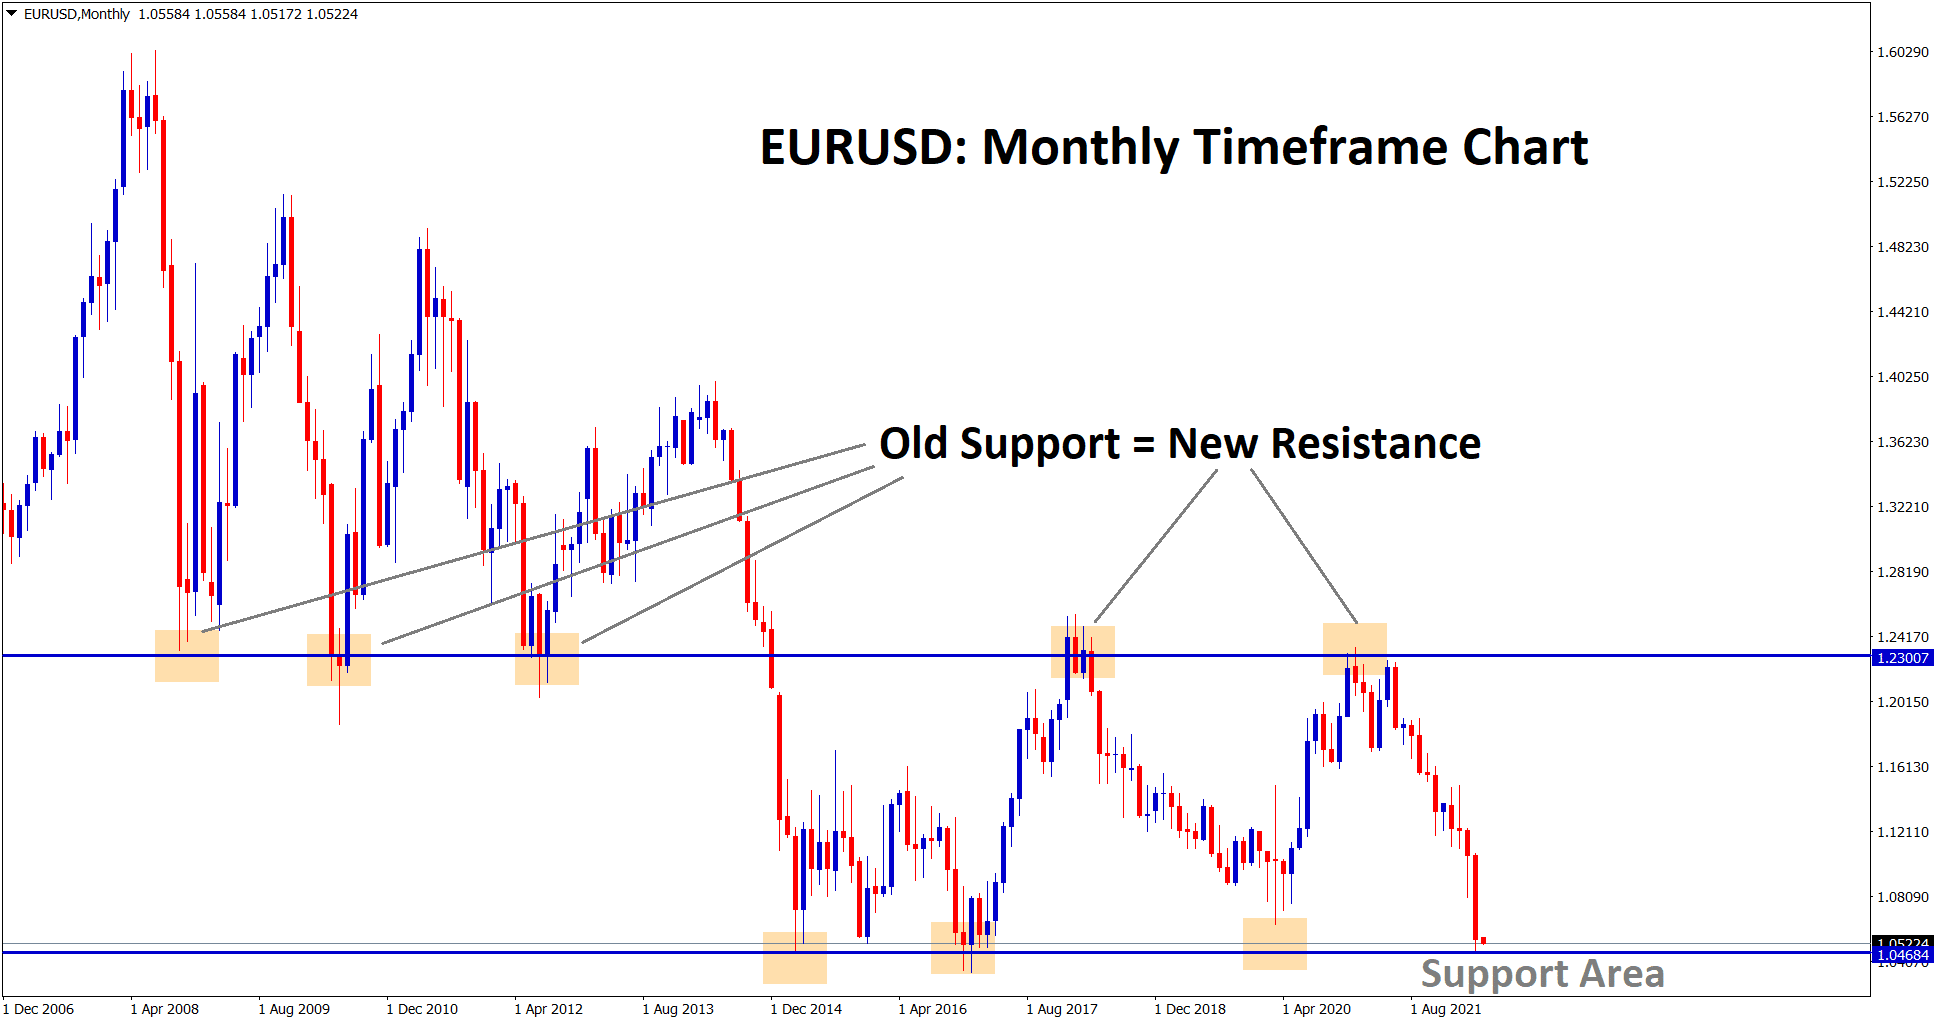 EURUSD hits the major support area in the monthly timeframe chart